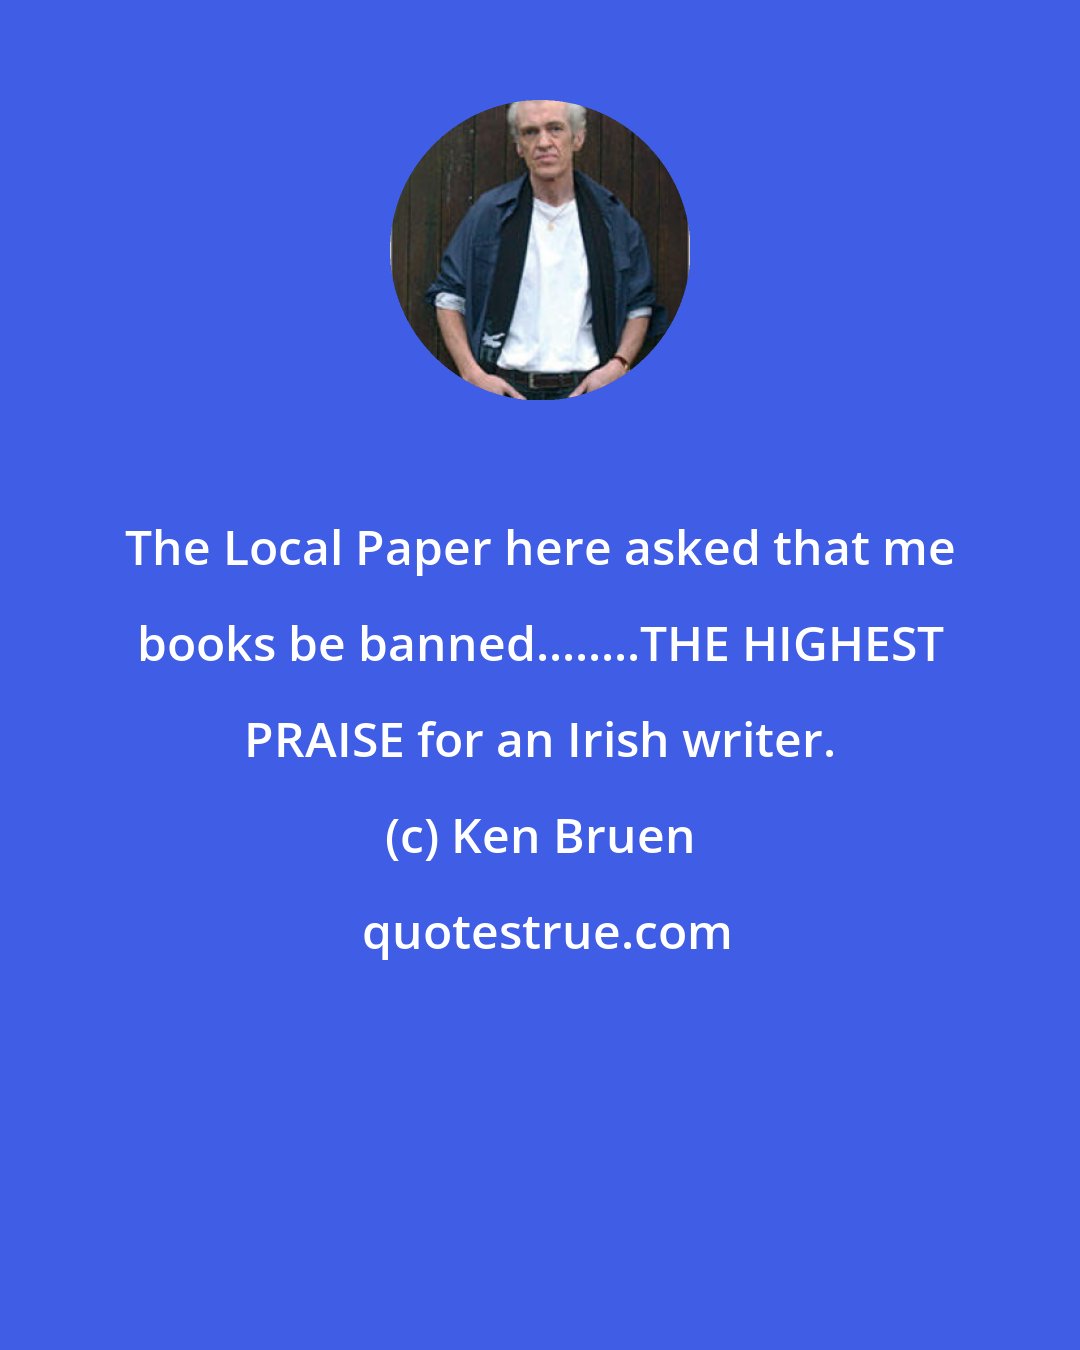 Ken Bruen: The Local Paper here asked that me books be banned........THE HIGHEST PRAISE for an Irish writer.